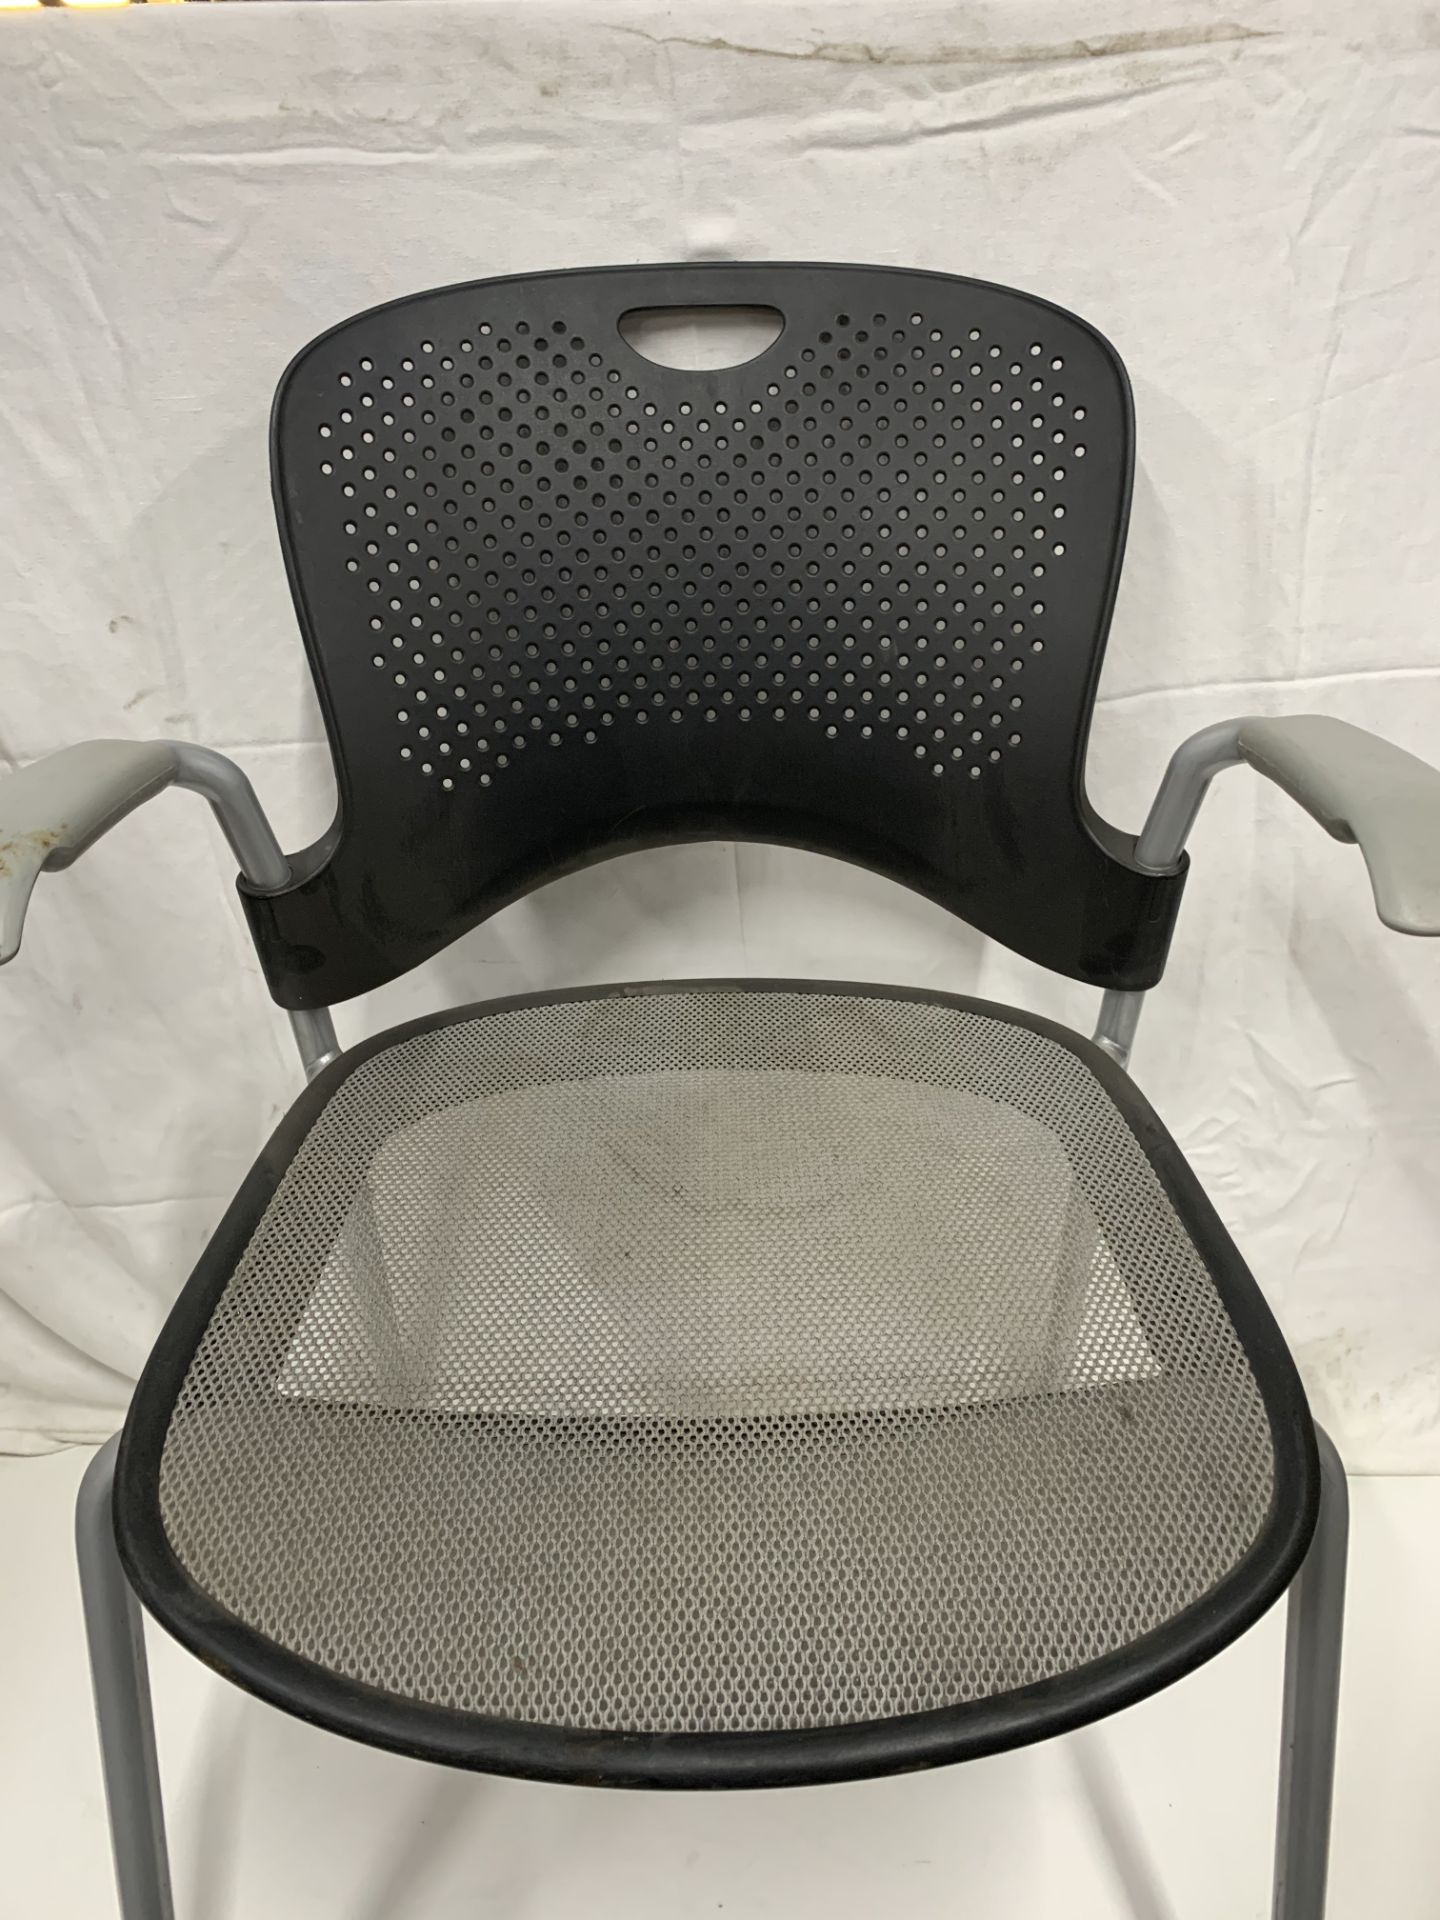 Steel and Plastic Grey Office Chair - Image 2 of 2